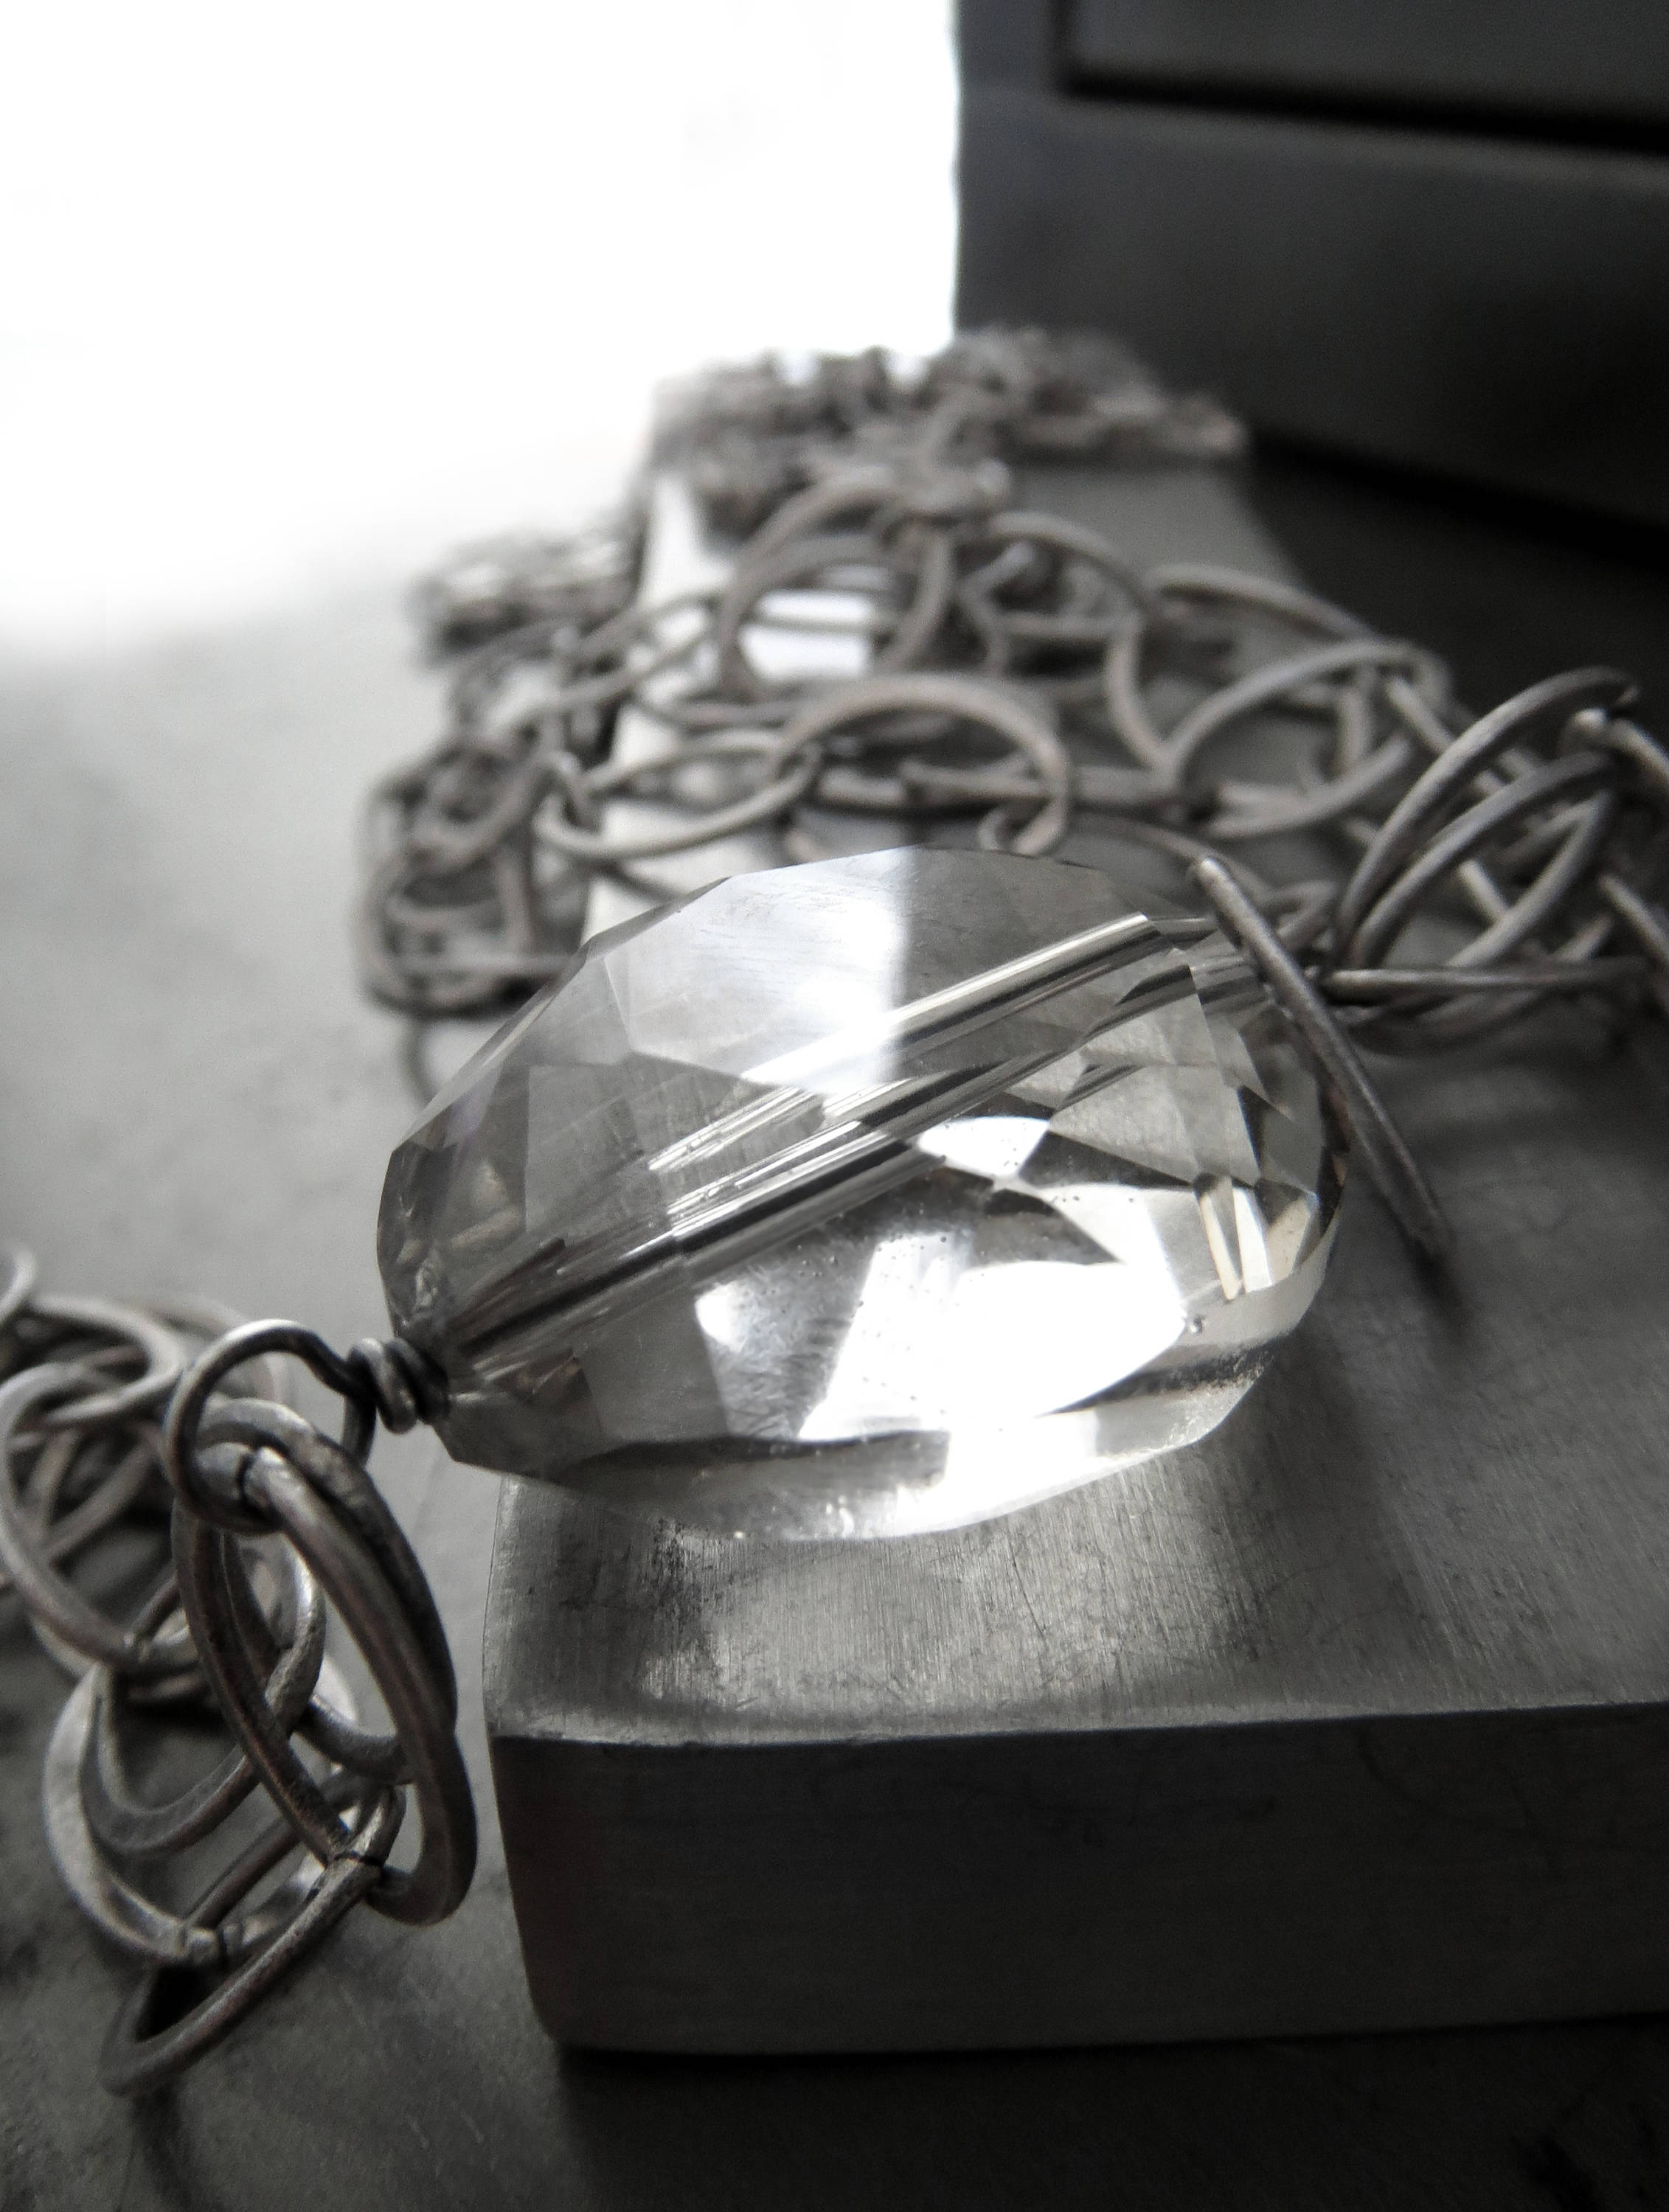 Long Geometric Necklace with Oval Clear Crystal Pendant